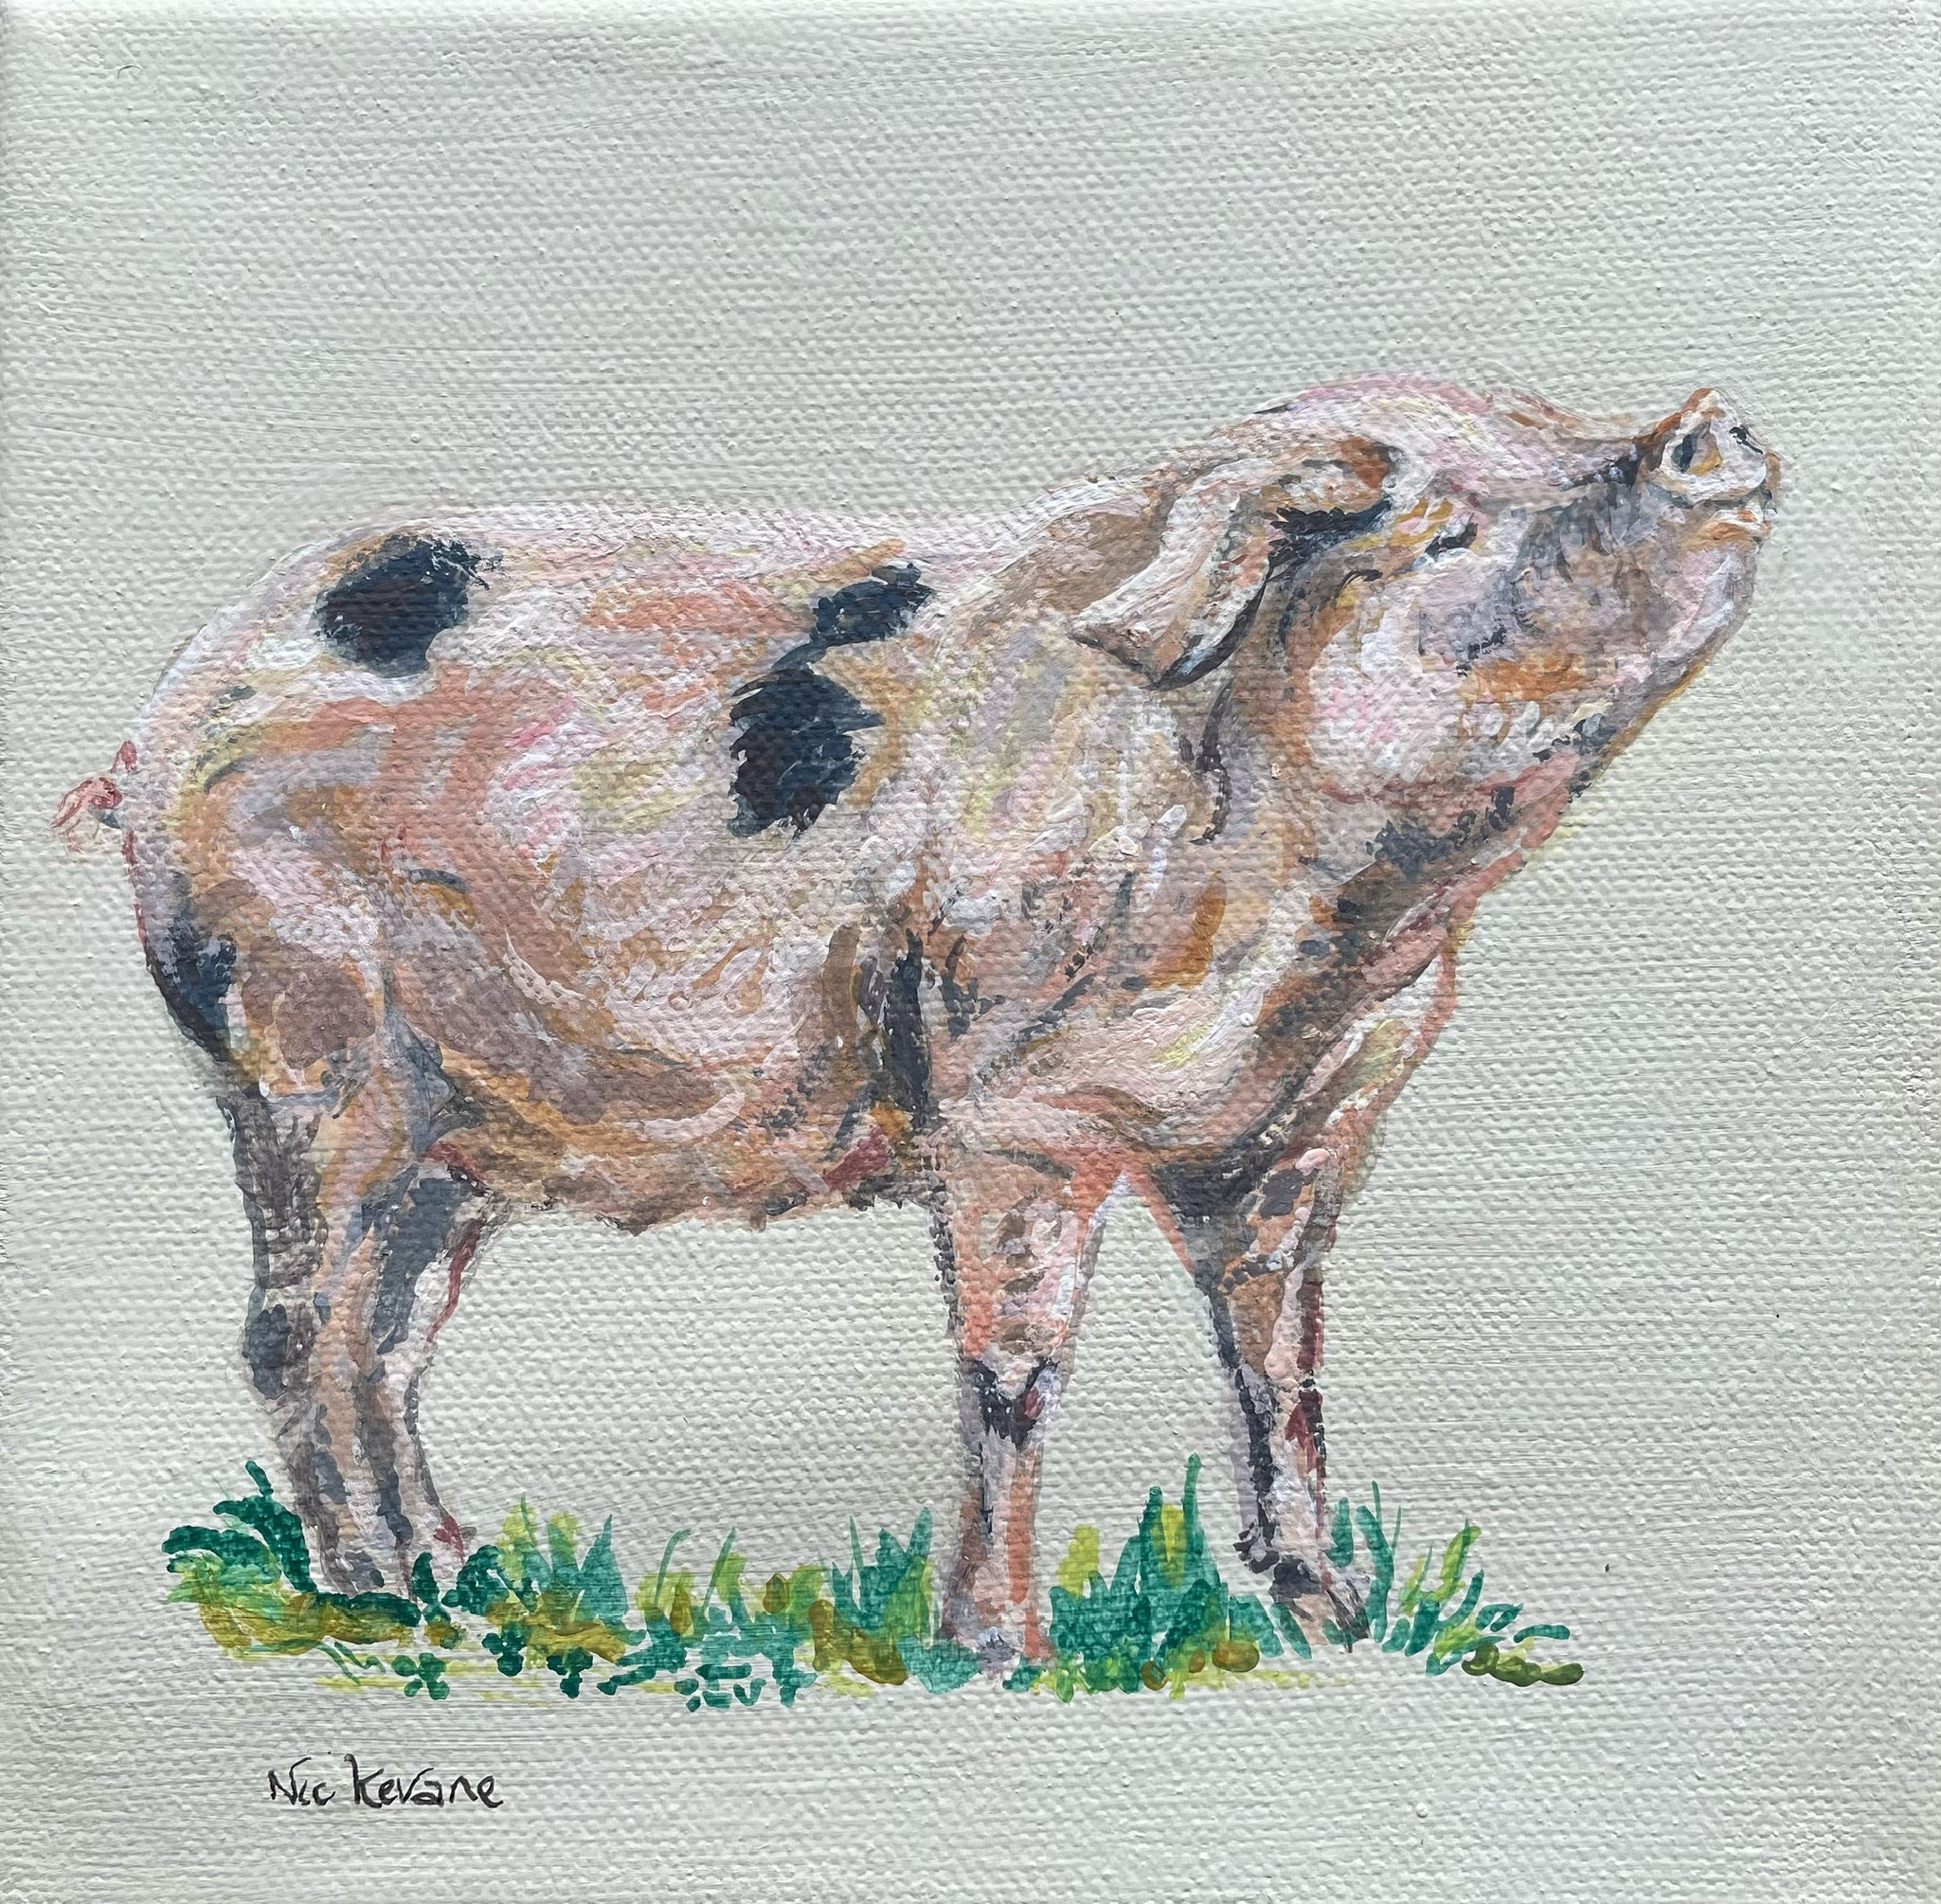 Gloucester Old Spot Pig - My mini paintings depict various countryside subjects painted on soft off-white backgrounds.